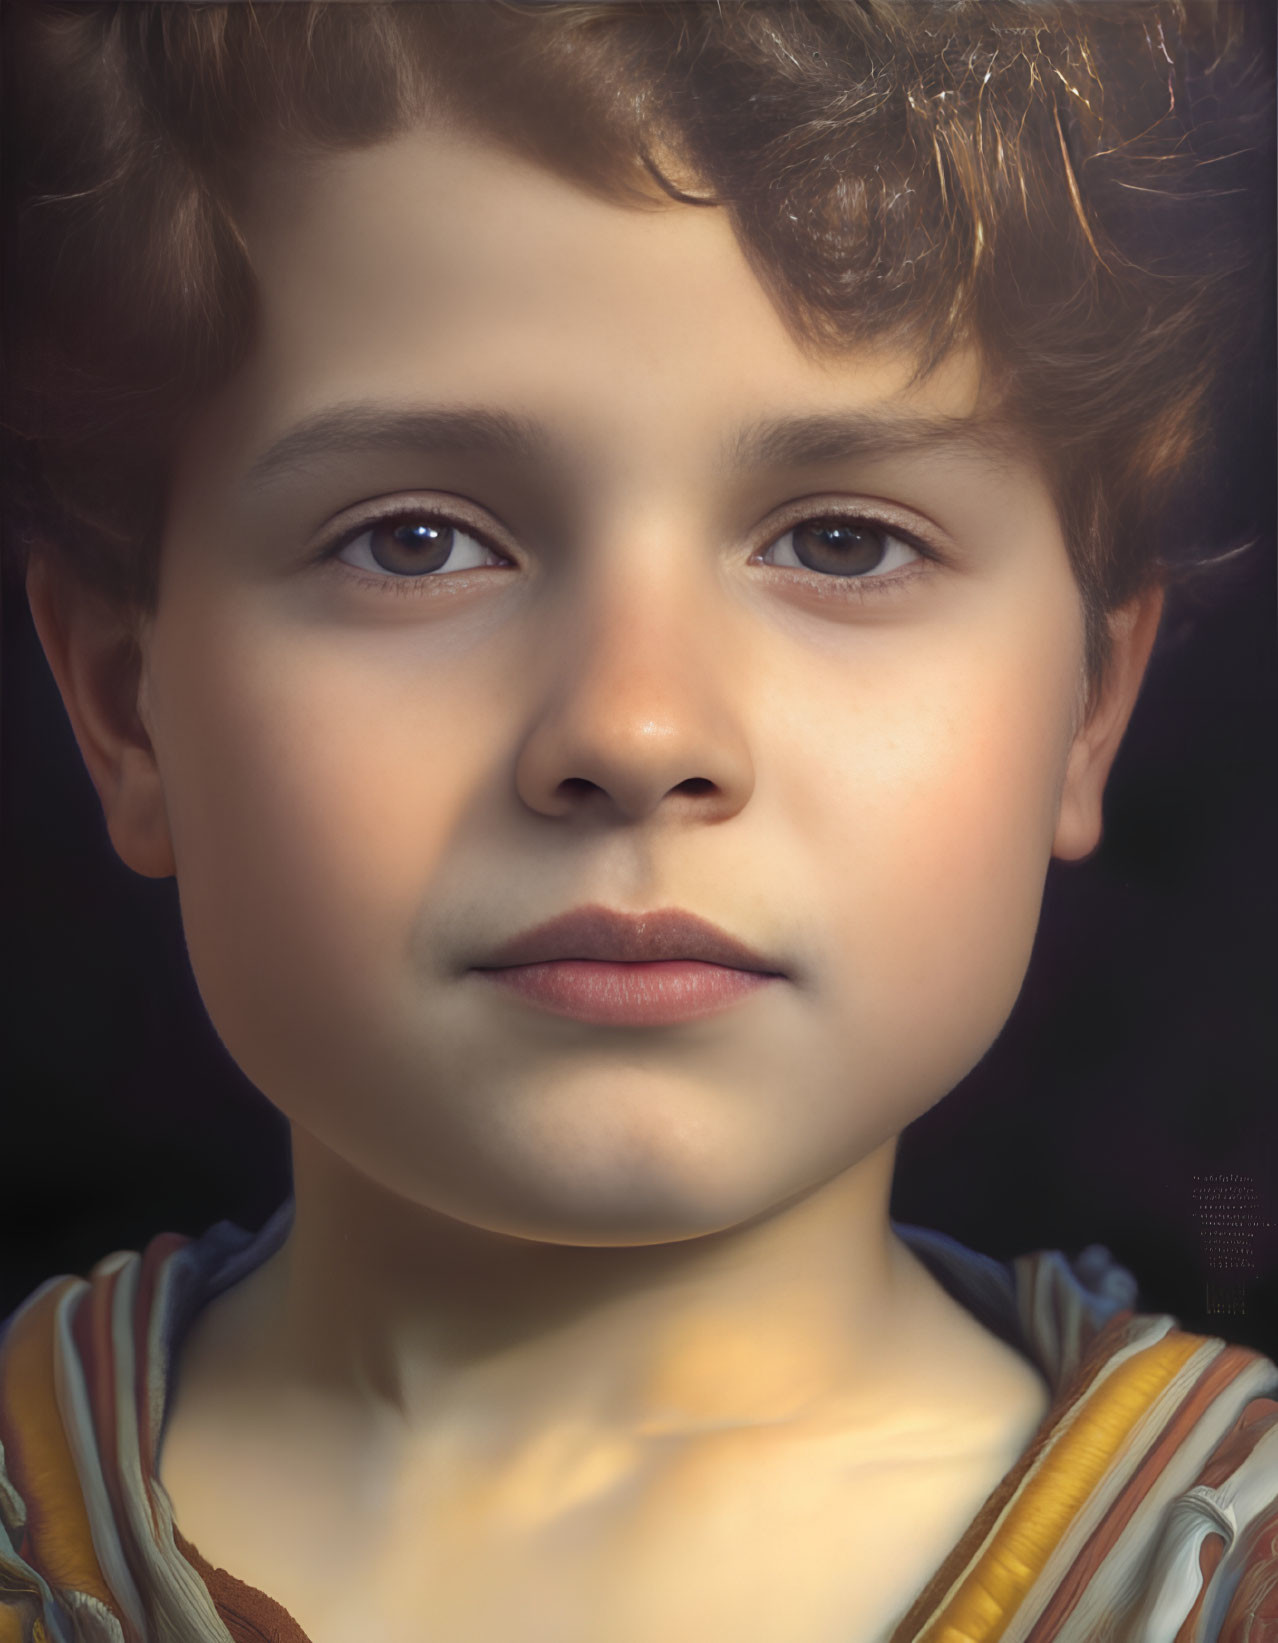 Portrait of Young Boy with Brown Curly Hair and Striped Shirt